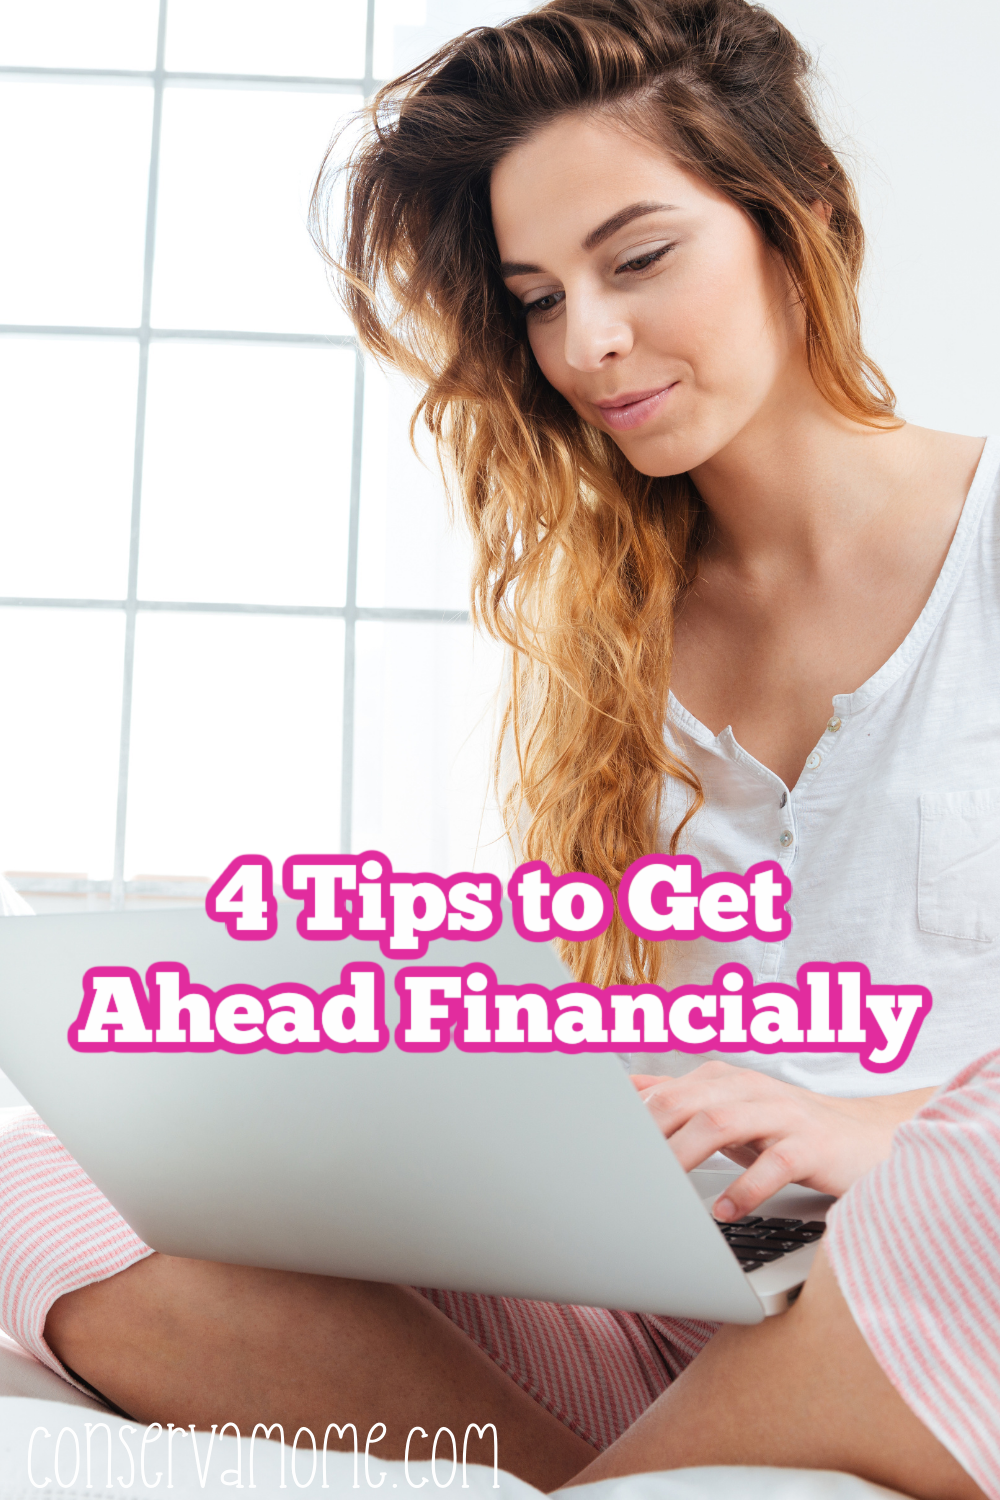 4 Tips to Get Ahead Financially